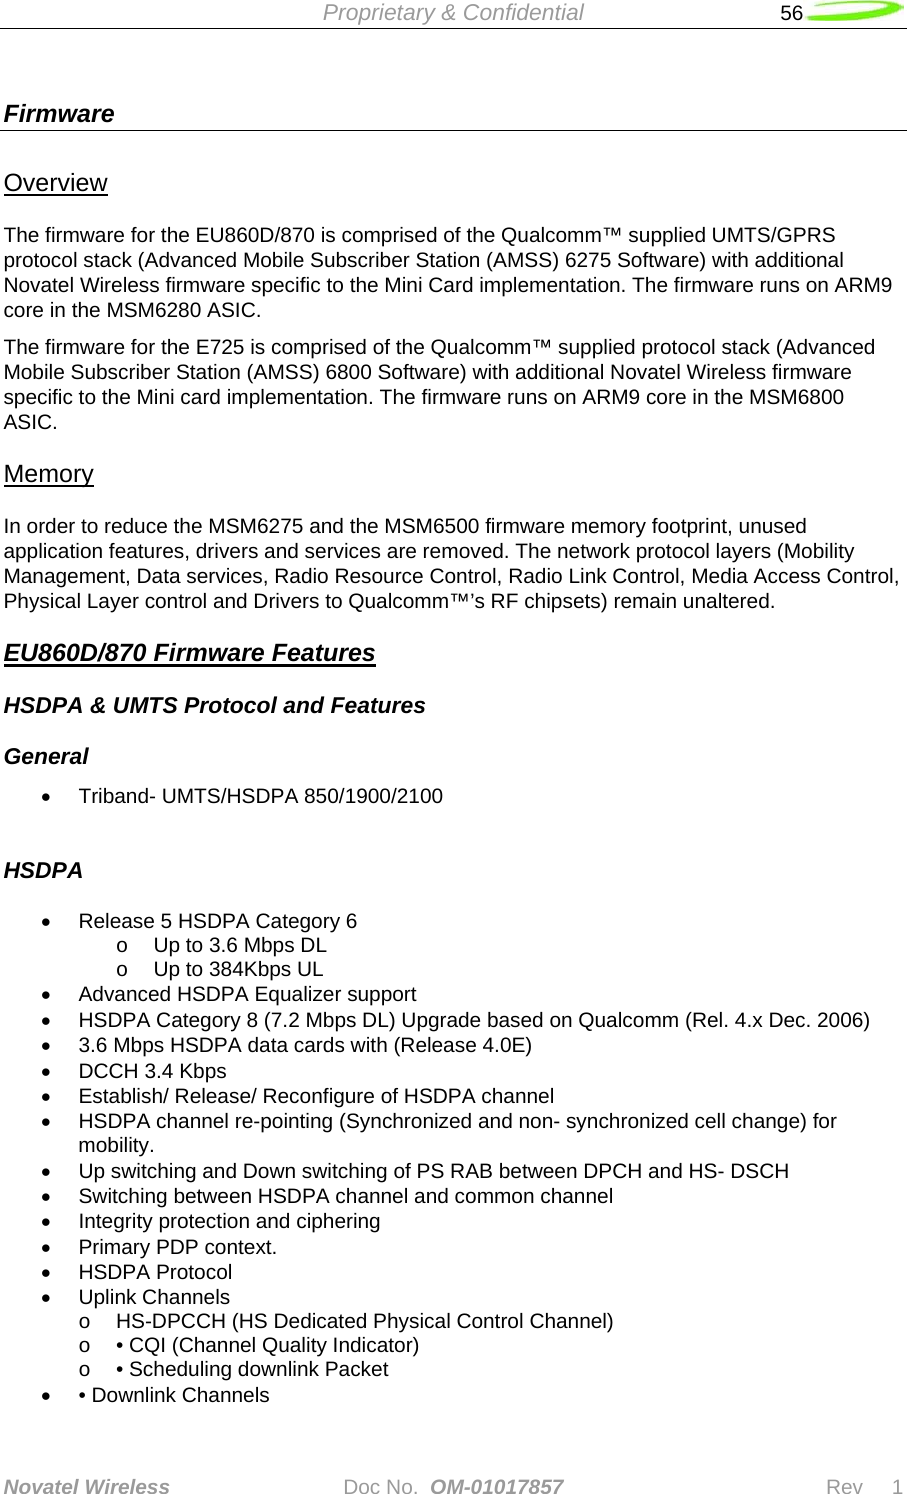  Proprietary &amp; Confidential   56   Novatel Wireless   Doc No.  OM-01017857                              Rev     1  Firmware    Overview The firmware for the EU860D/870 is comprised of the Qualcomm™ supplied UMTS/GPRS protocol stack (Advanced Mobile Subscriber Station (AMSS) 6275 Software) with additional Novatel Wireless firmware specific to the Mini Card implementation. The firmware runs on ARM9 core in the MSM6280 ASIC.  The firmware for the E725 is comprised of the Qualcomm™ supplied protocol stack (Advanced Mobile Subscriber Station (AMSS) 6800 Software) with additional Novatel Wireless firmware specific to the Mini card implementation. The firmware runs on ARM9 core in the MSM6800 ASIC. Memory In order to reduce the MSM6275 and the MSM6500 firmware memory footprint, unused application features, drivers and services are removed. The network protocol layers (Mobility Management, Data services, Radio Resource Control, Radio Link Control, Media Access Control, Physical Layer control and Drivers to Qualcomm™’s RF chipsets) remain unaltered.  EU860D/870 Firmware Features HSDPA &amp; UMTS Protocol and Features  General  • Triband- UMTS/HSDPA 850/1900/2100  HSDPA  •  Release 5 HSDPA Category 6  o  Up to 3.6 Mbps DL  o  Up to 384Kbps UL •  Advanced HSDPA Equalizer support •  HSDPA Category 8 (7.2 Mbps DL) Upgrade based on Qualcomm (Rel. 4.x Dec. 2006) •  3.6 Mbps HSDPA data cards with (Release 4.0E)  •  DCCH 3.4 Kbps •  Establish/ Release/ Reconfigure of HSDPA channel •  HSDPA channel re-pointing (Synchronized and non- synchronized cell change) for mobility. •  Up switching and Down switching of PS RAB between DPCH and HS- DSCH •  Switching between HSDPA channel and common channel •  Integrity protection and ciphering • Primary PDP context. • HSDPA Protocol • Uplink Channels o  HS-DPCCH (HS Dedicated Physical Control Channel) o  • CQI (Channel Quality Indicator) o  • Scheduling downlink Packet • • Downlink Channels 